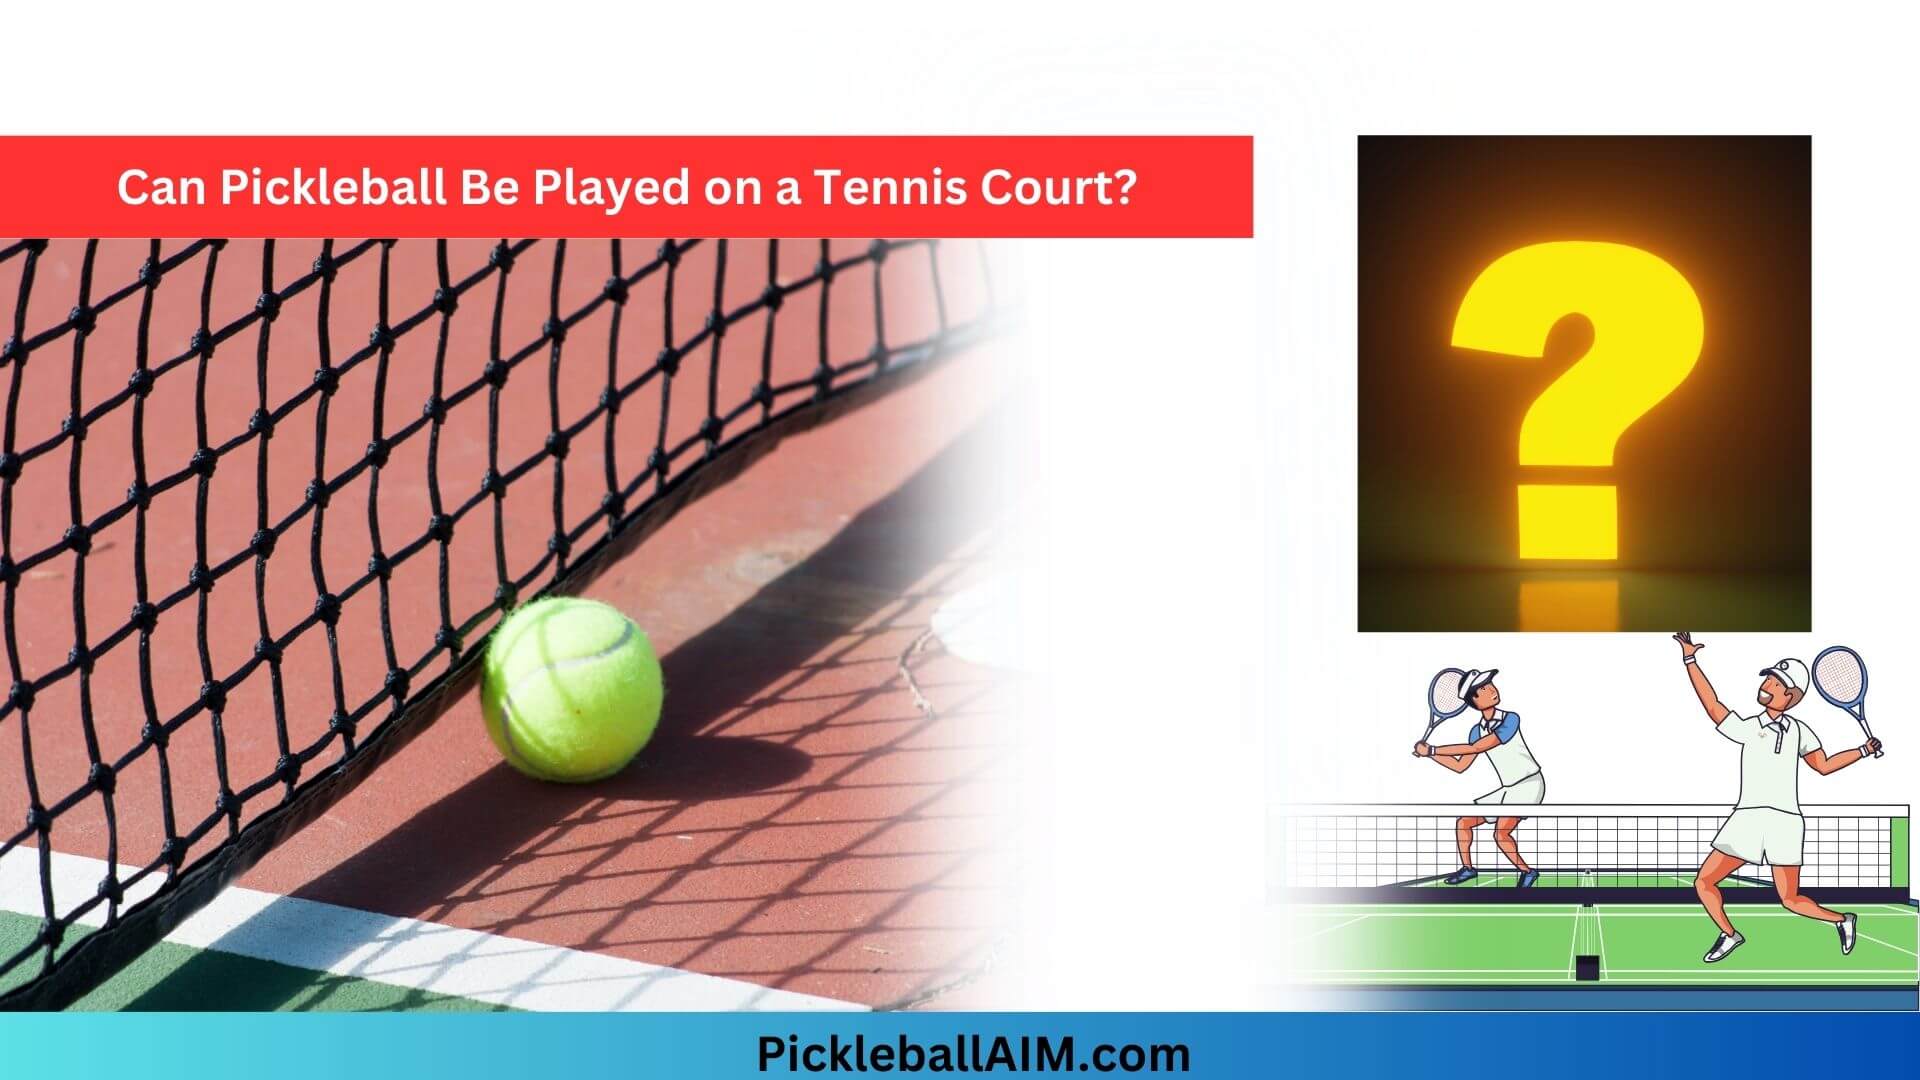 Can Pickleball Be Played on a Tennis Court?